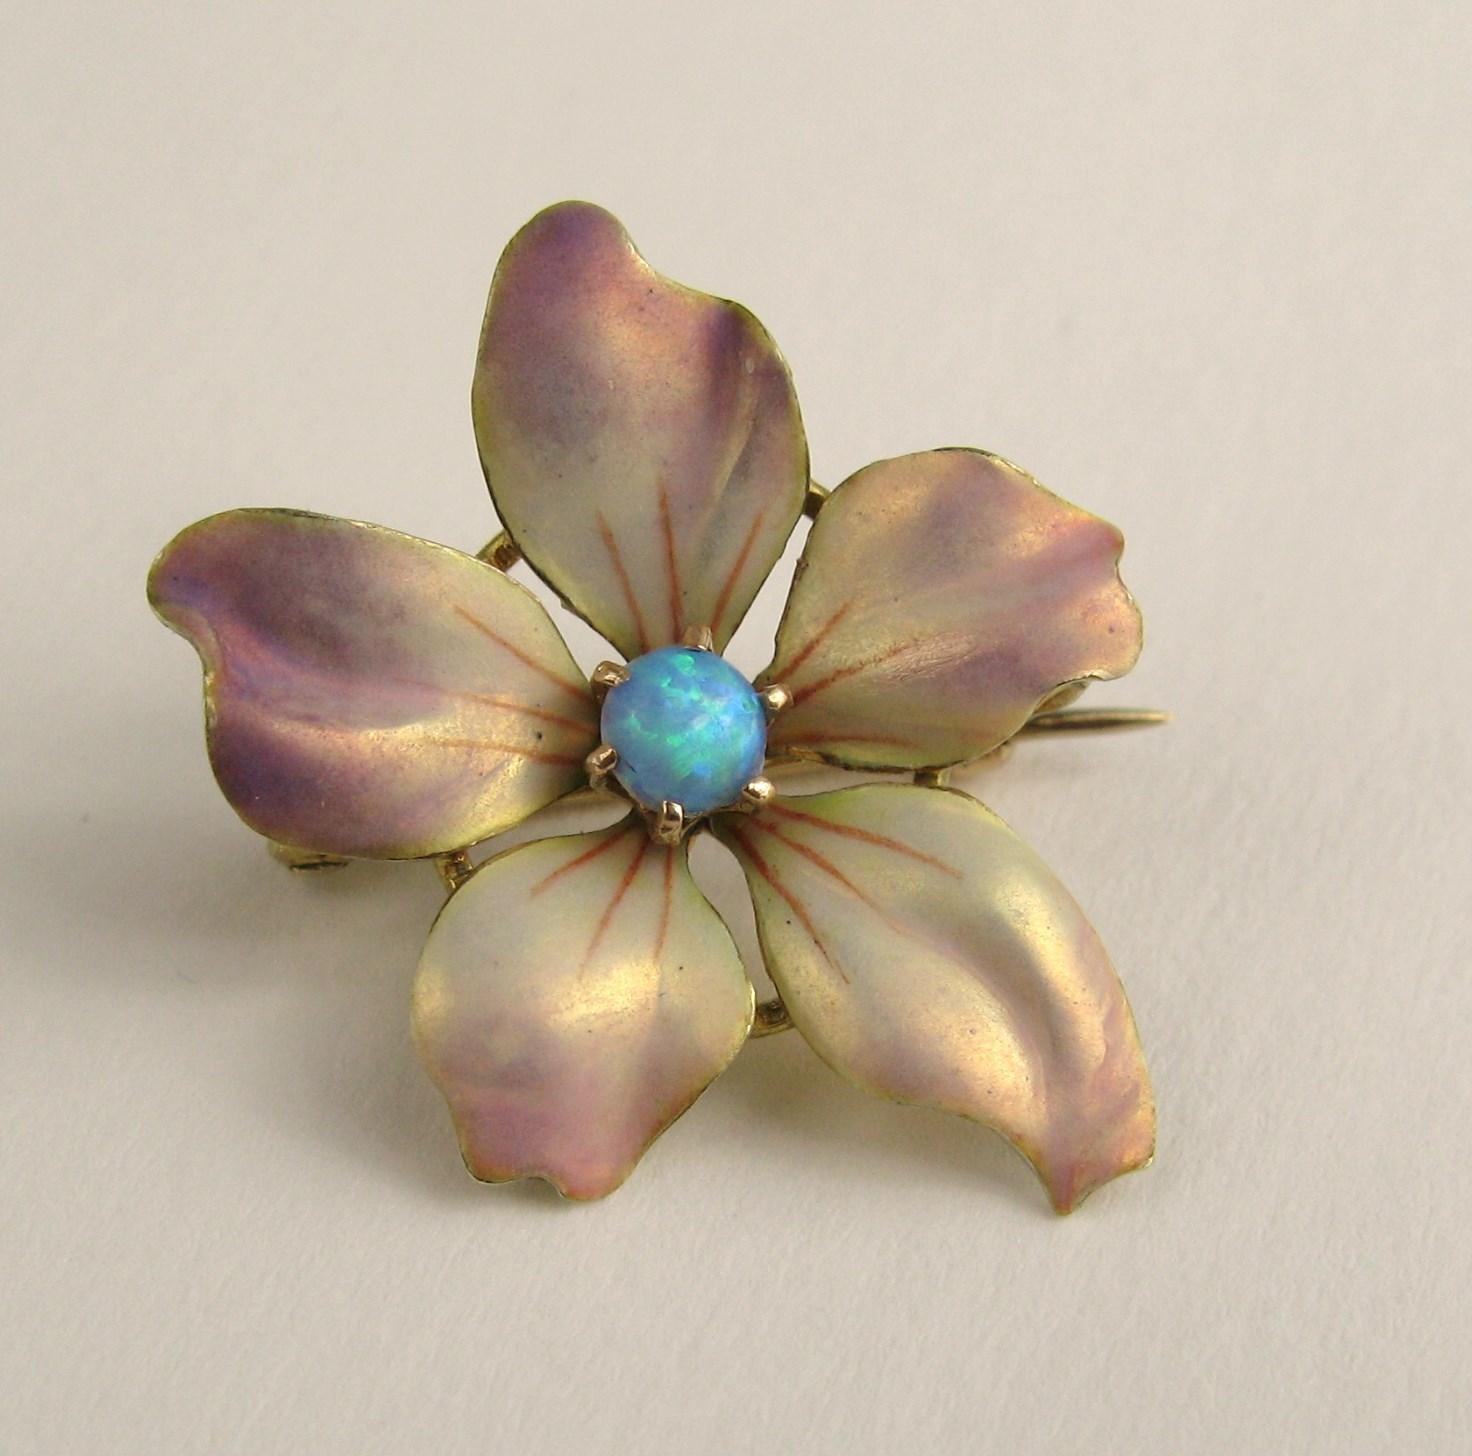 10k Gold Art Nouveau Brooch Opal & Enamel Pansy Pin. Look at the colors on this piece, the opal is beautiful. Wonderful enamel in a  pastel hue. Measuring 1.03